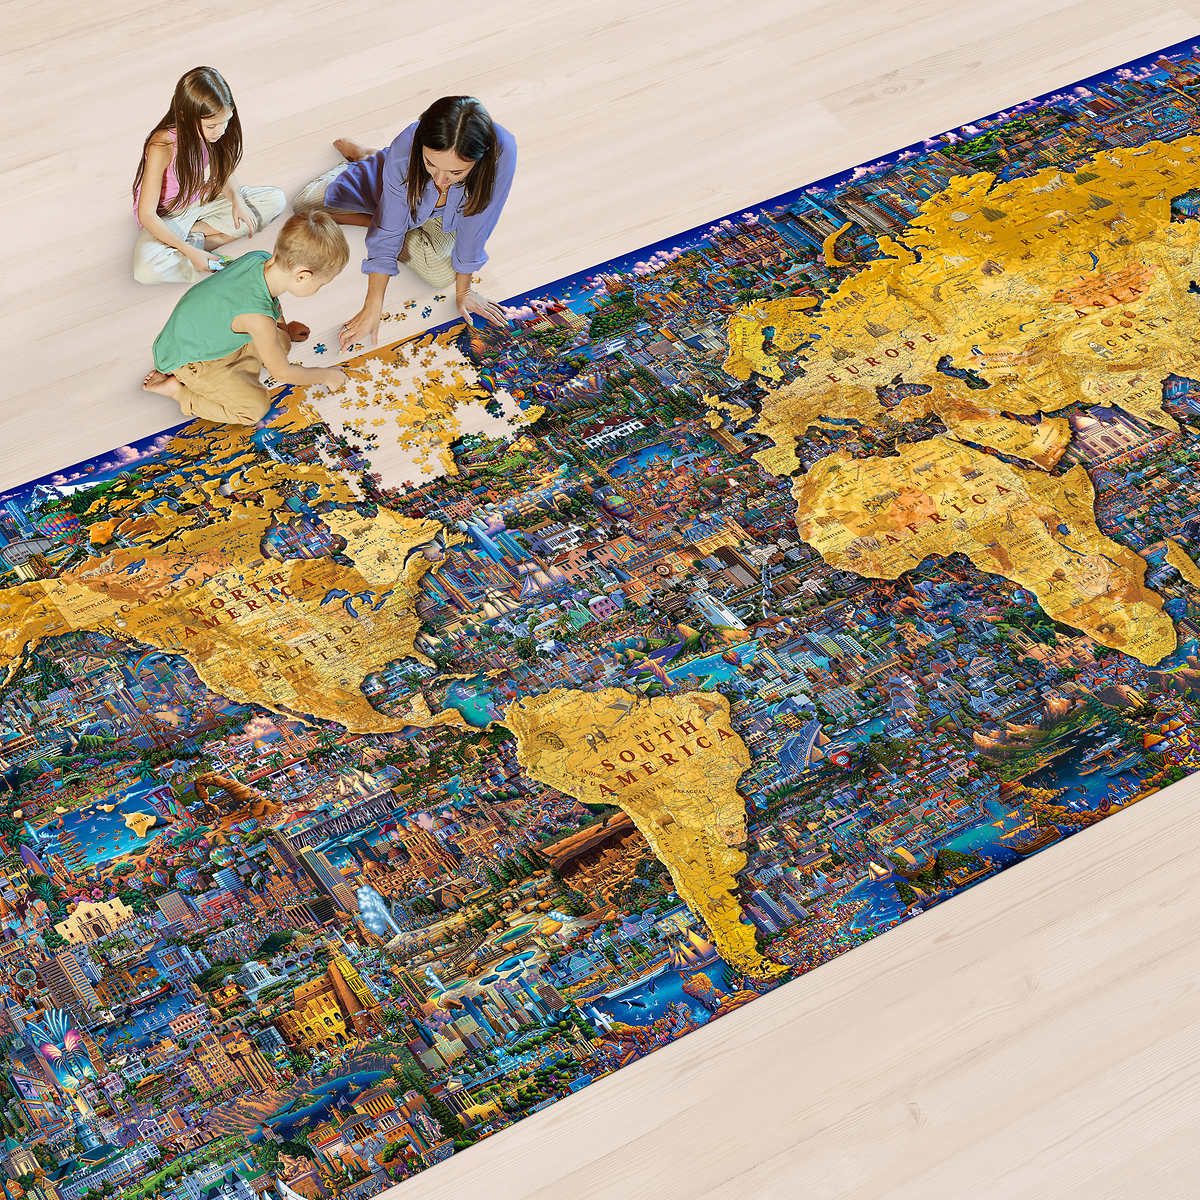 Costco Sells a Massive 60,000-Piece Puzzle That Will Take Up Your ...